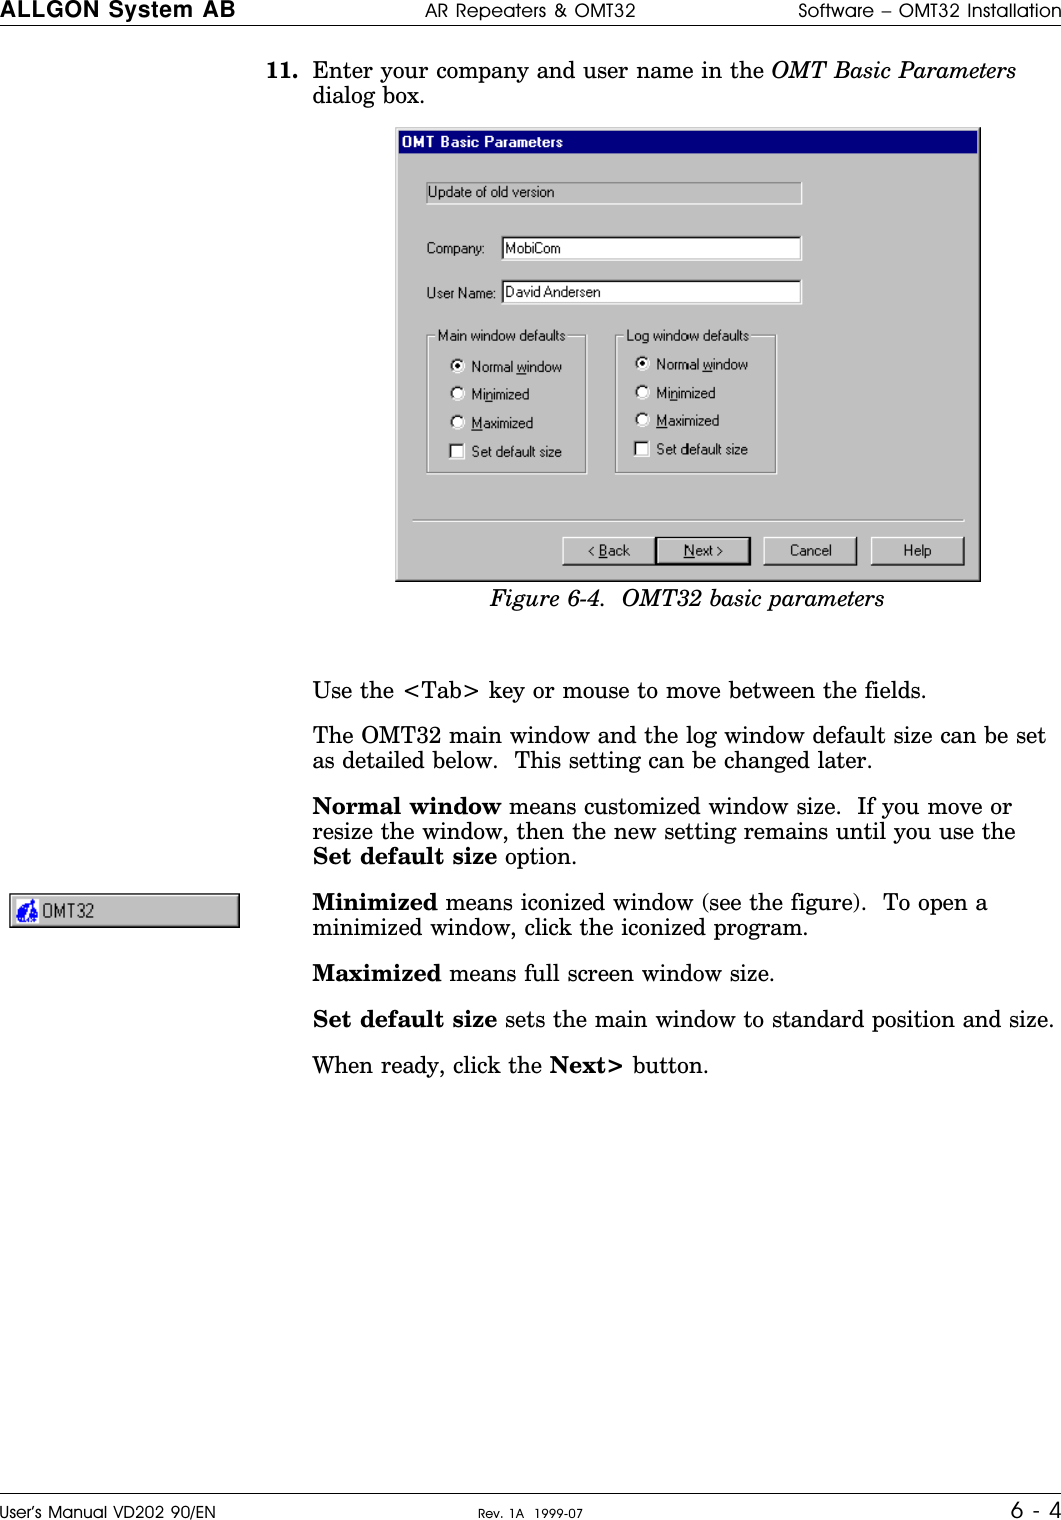 11. Enter your company and user name in the OMT Basic Parametersdialog box.Use the &lt;Tab&gt; key or mouse to move between the fields.The OMT32 main window and the log window default size can be setas detailed below.  This setting can be changed later.Normal window means customized window size.  If you move orresize the window, then the new setting remains until you use theSet default size option.Minimized means iconized window (see the figure).  To open aminimized window, click the iconized program.Maximized means full screen window size.Set default size sets the main window to standard position and size.When ready, click the Next&gt; button.Figure 6-4.  OMT32 basic parametersALLGON System AB AR Repeaters &amp; OMT32 Software – OMT32 InstallationUser’s Manual VD202 90/EN Rev. 1A  1999-07 6 - 4